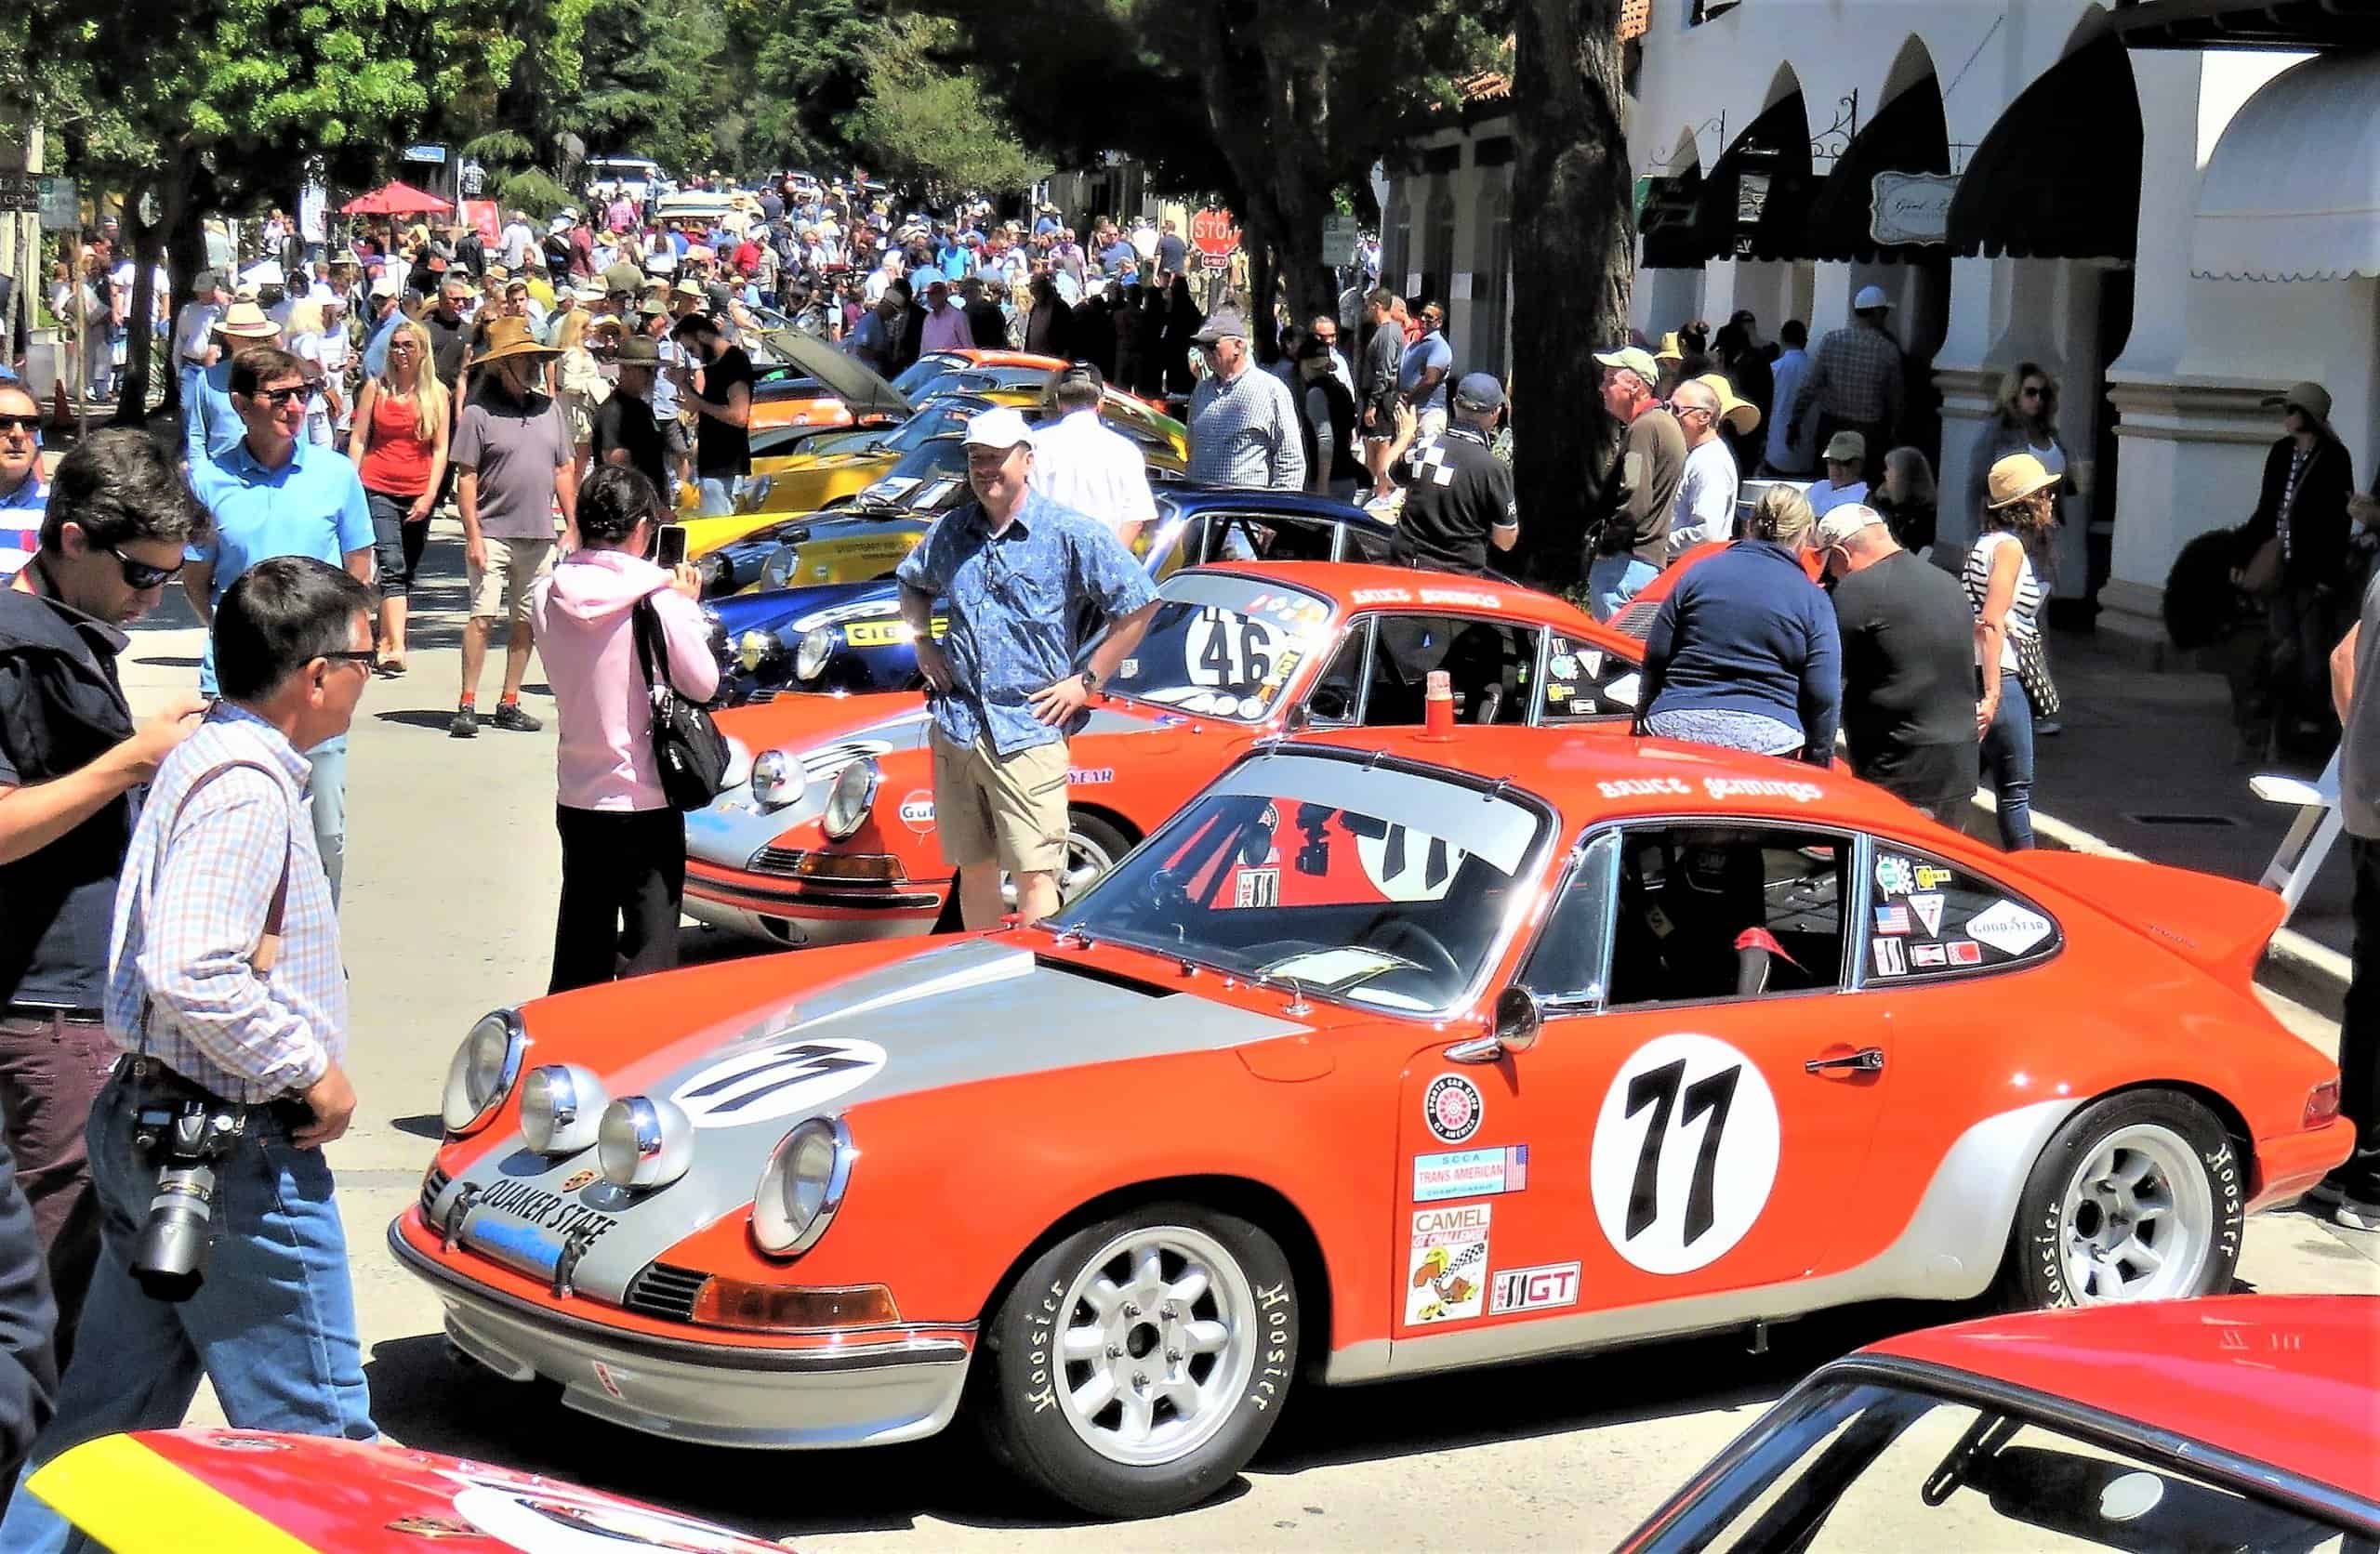 Carmel city council votes to limit and control Monterey Car Week events